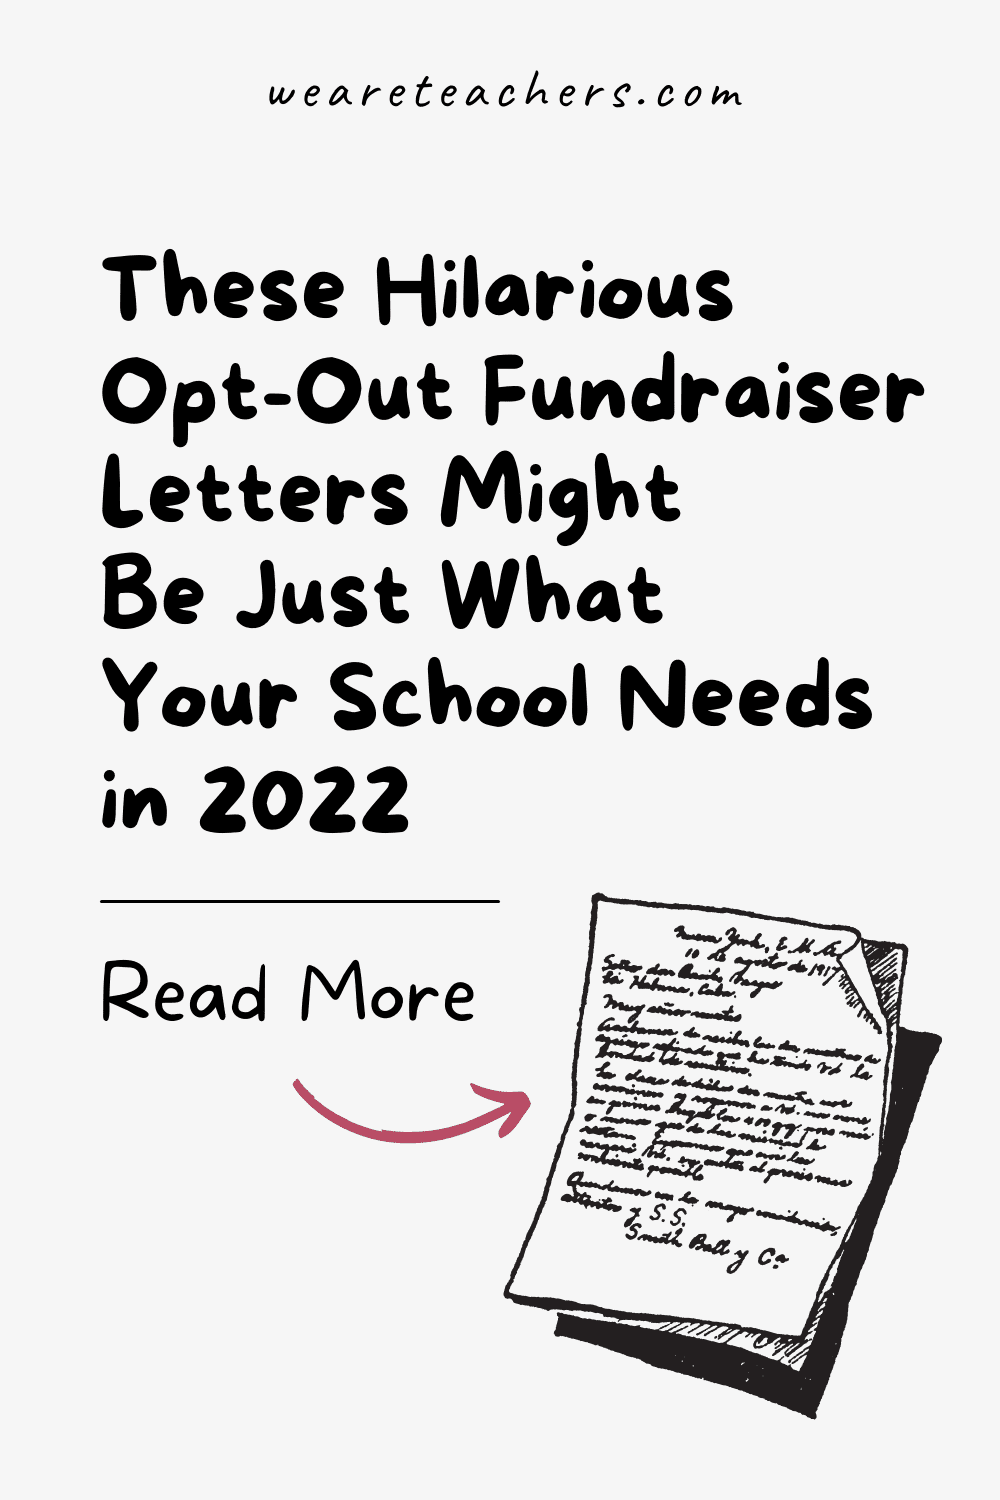 tired-of-selling-wrapping-paper-try-an-opt-out-school-fundraiser-letter